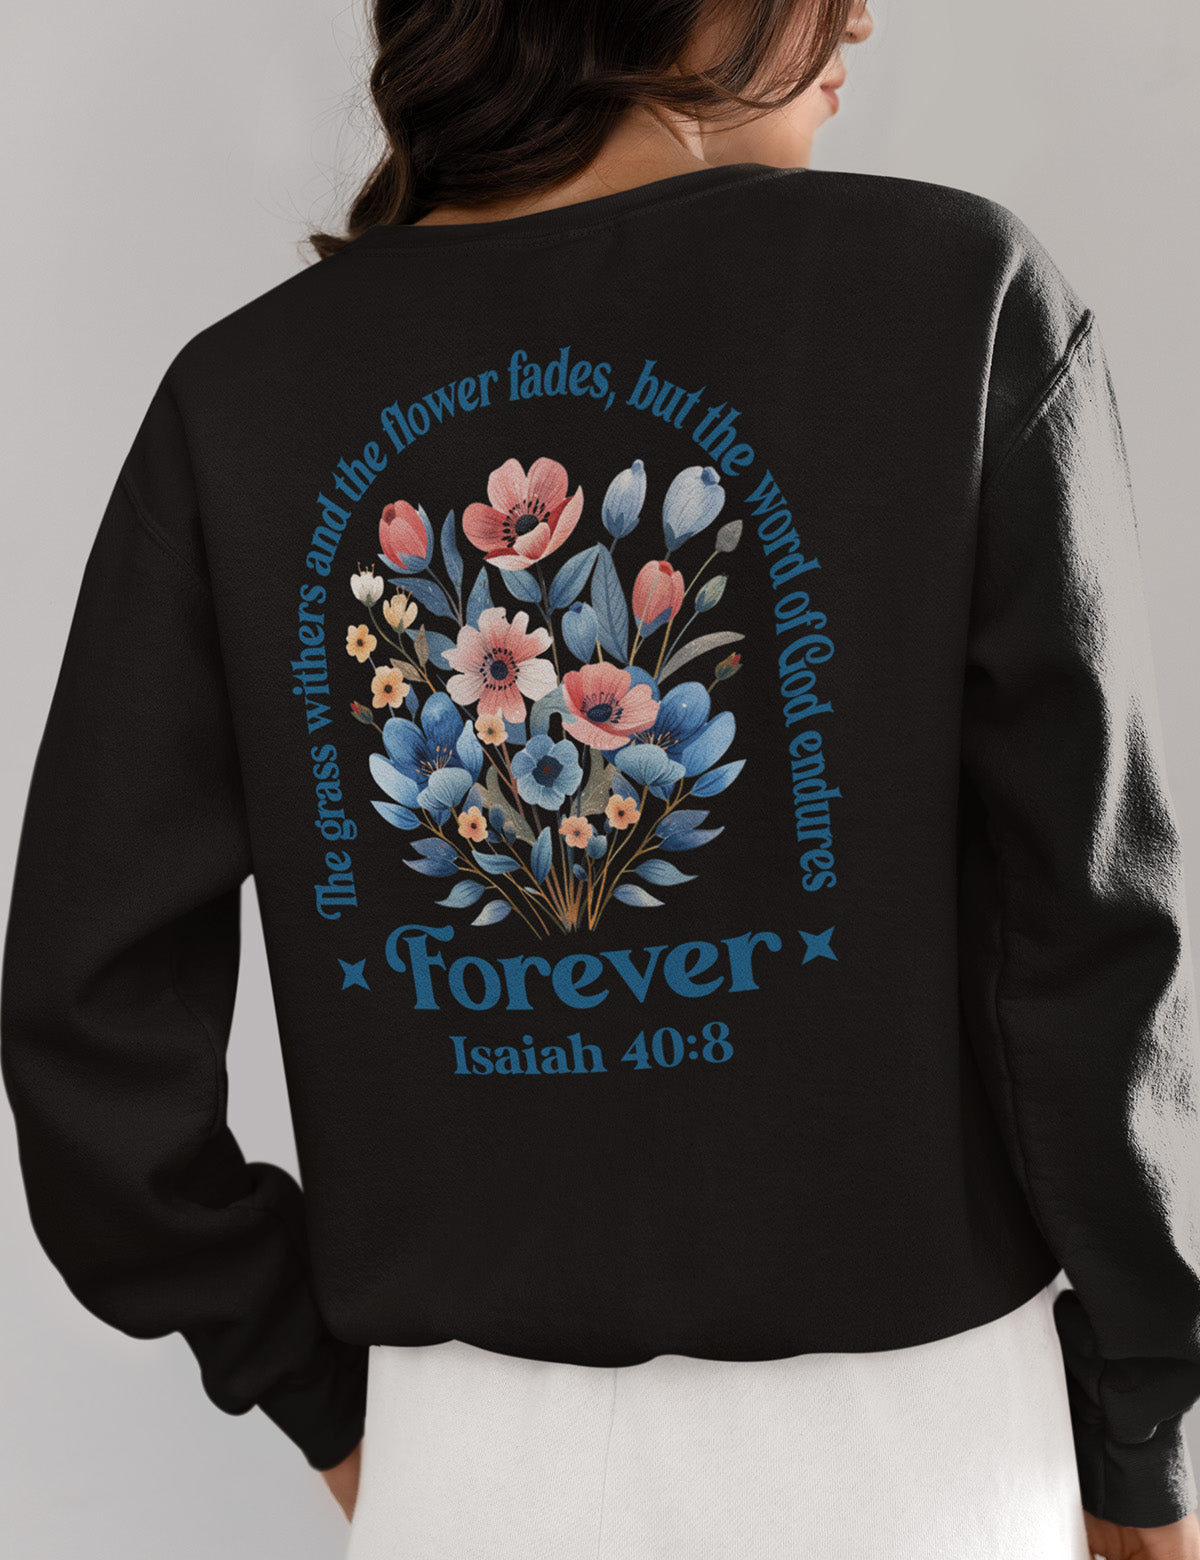 The Grass Withers and The Flower Fades, But The Word of God Endures Forever Christian Sweatshirts